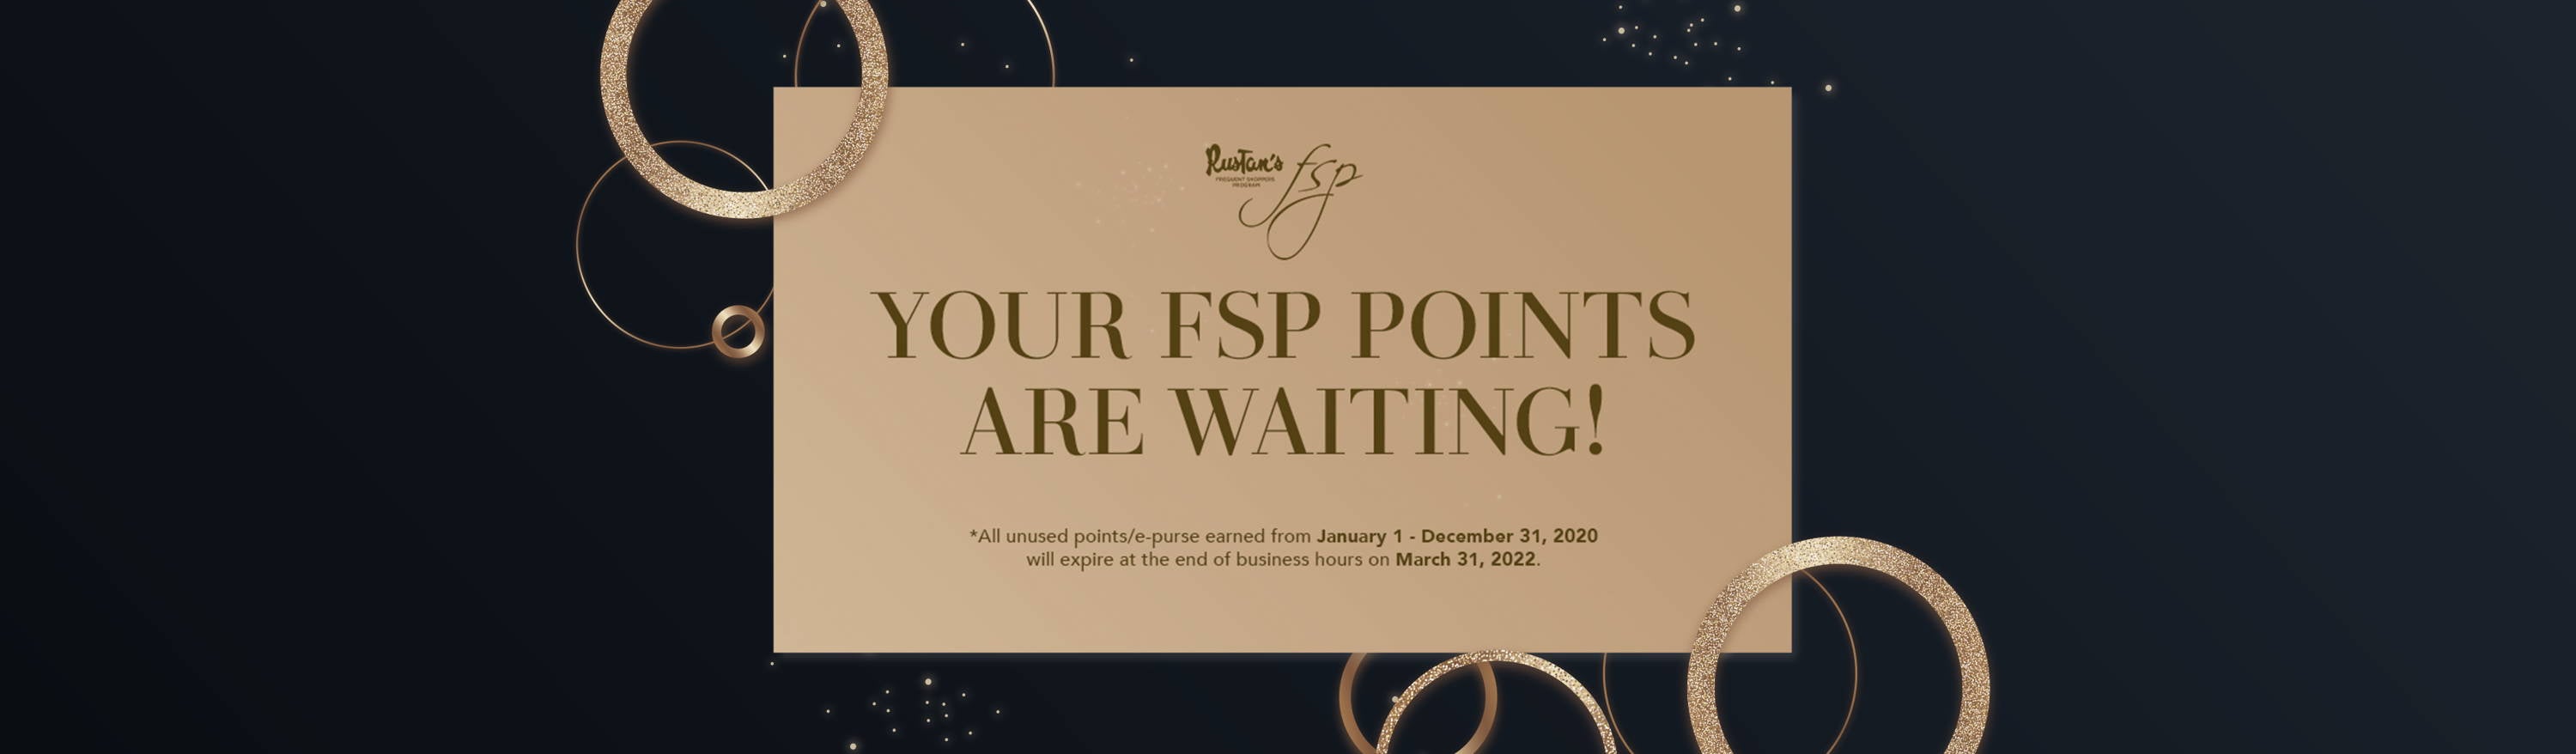 Your FSP Points Are Waiting This Month of March